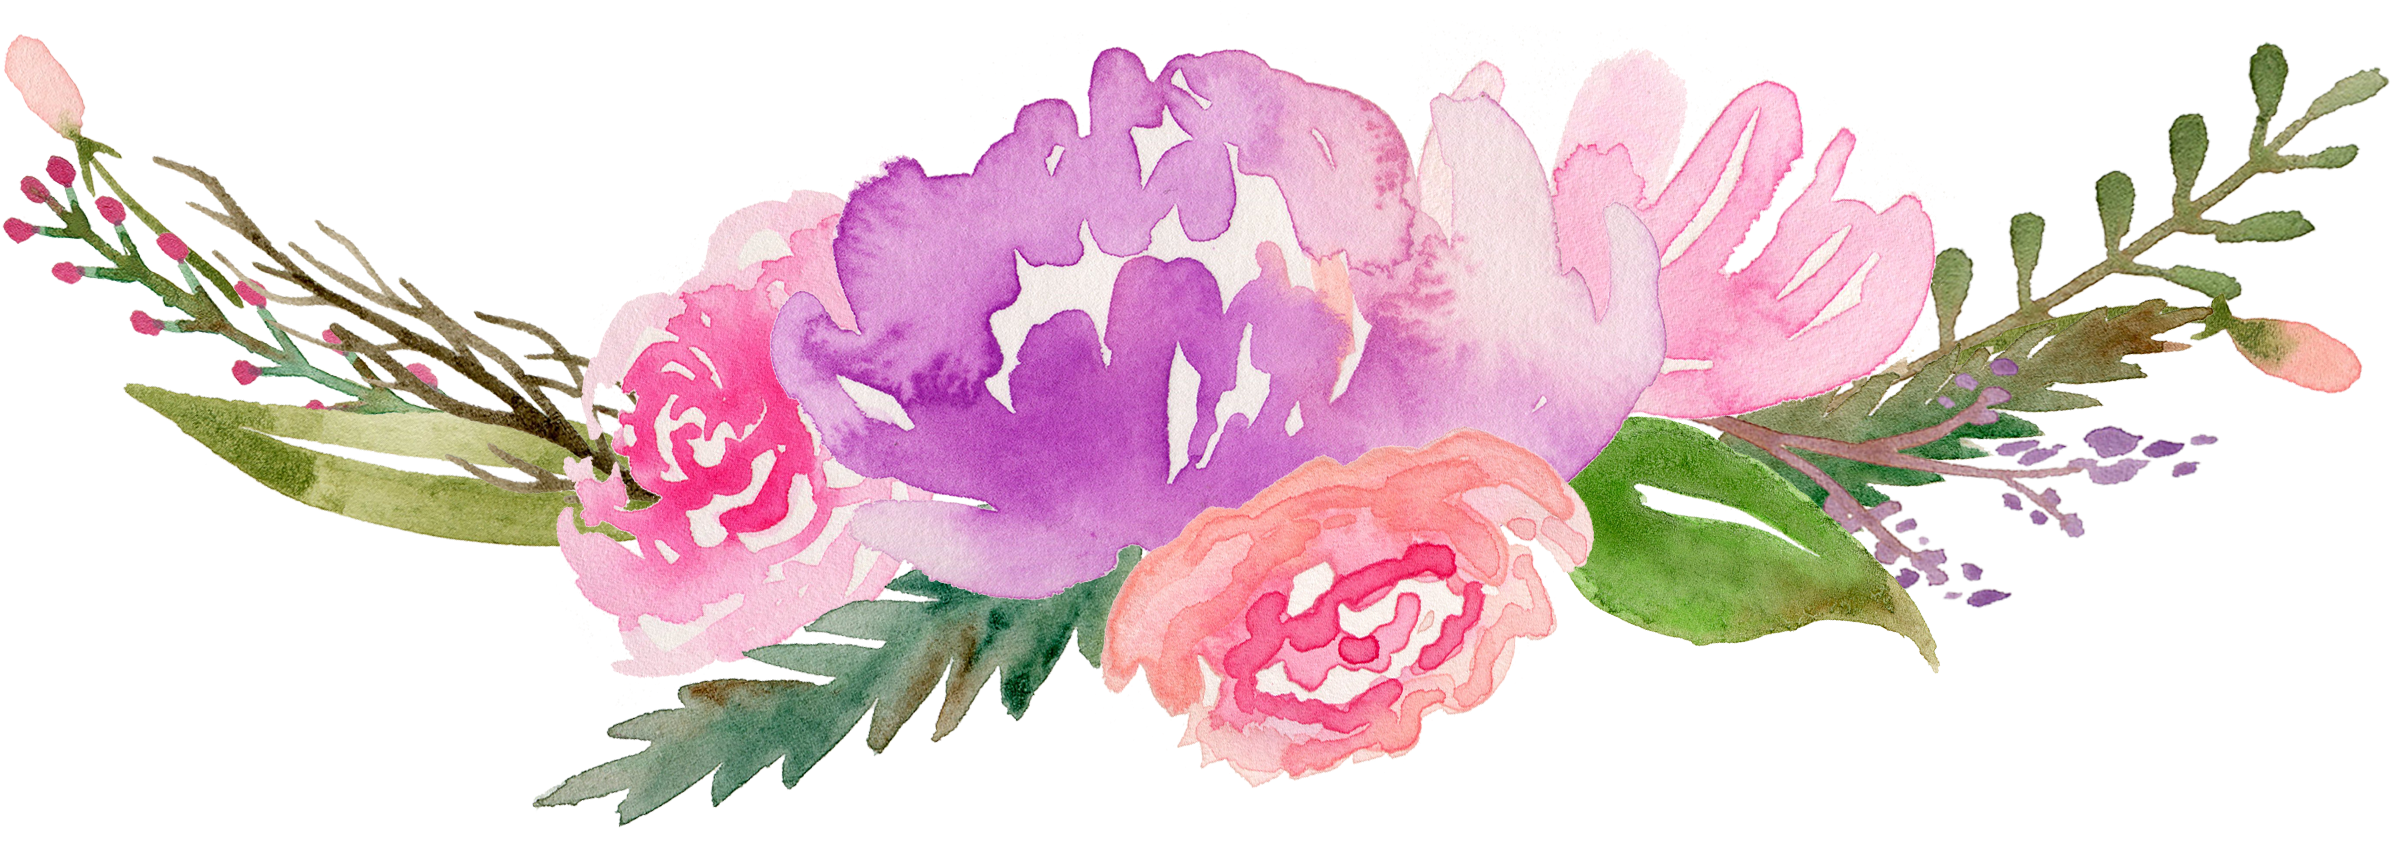 Download PNG image - Flower Watercolor Art PNG Pic 